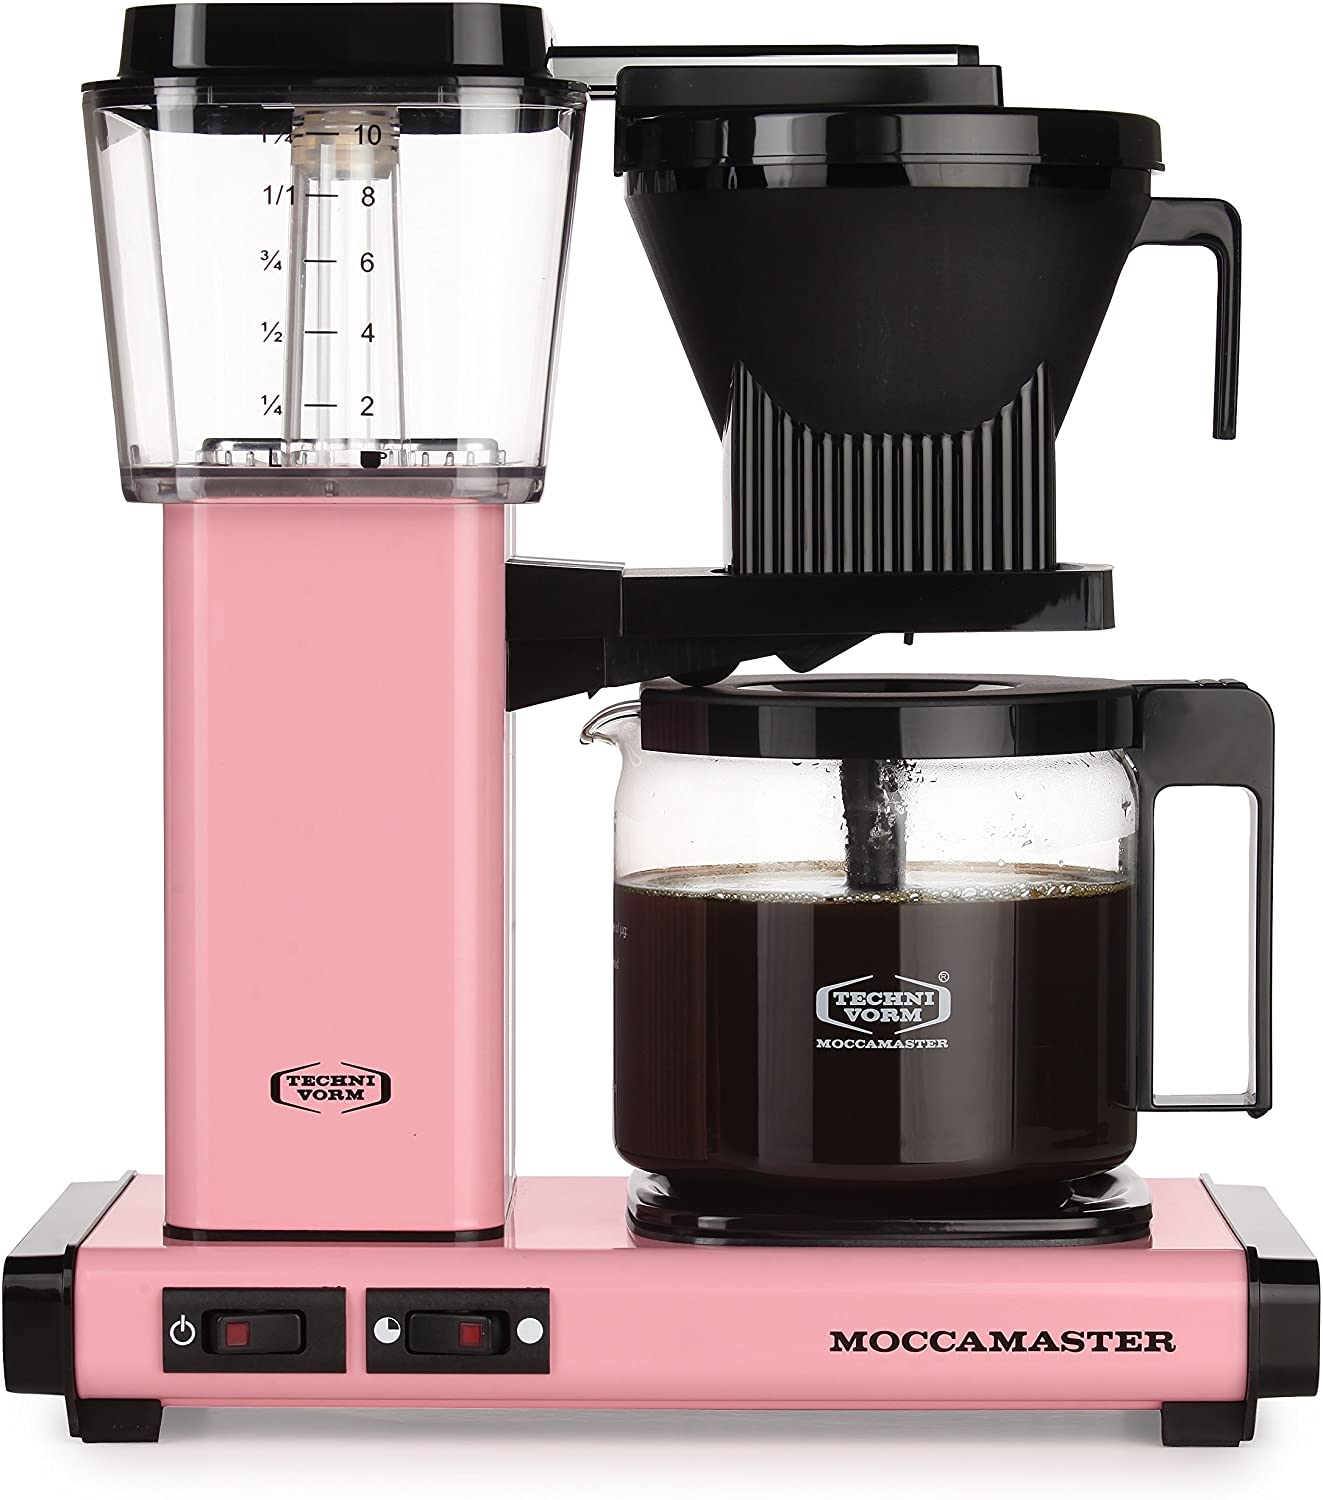 Technivorm-Moccamaster KBG 741 10-Cup Coffee Brewer with Glass Carafe Pink